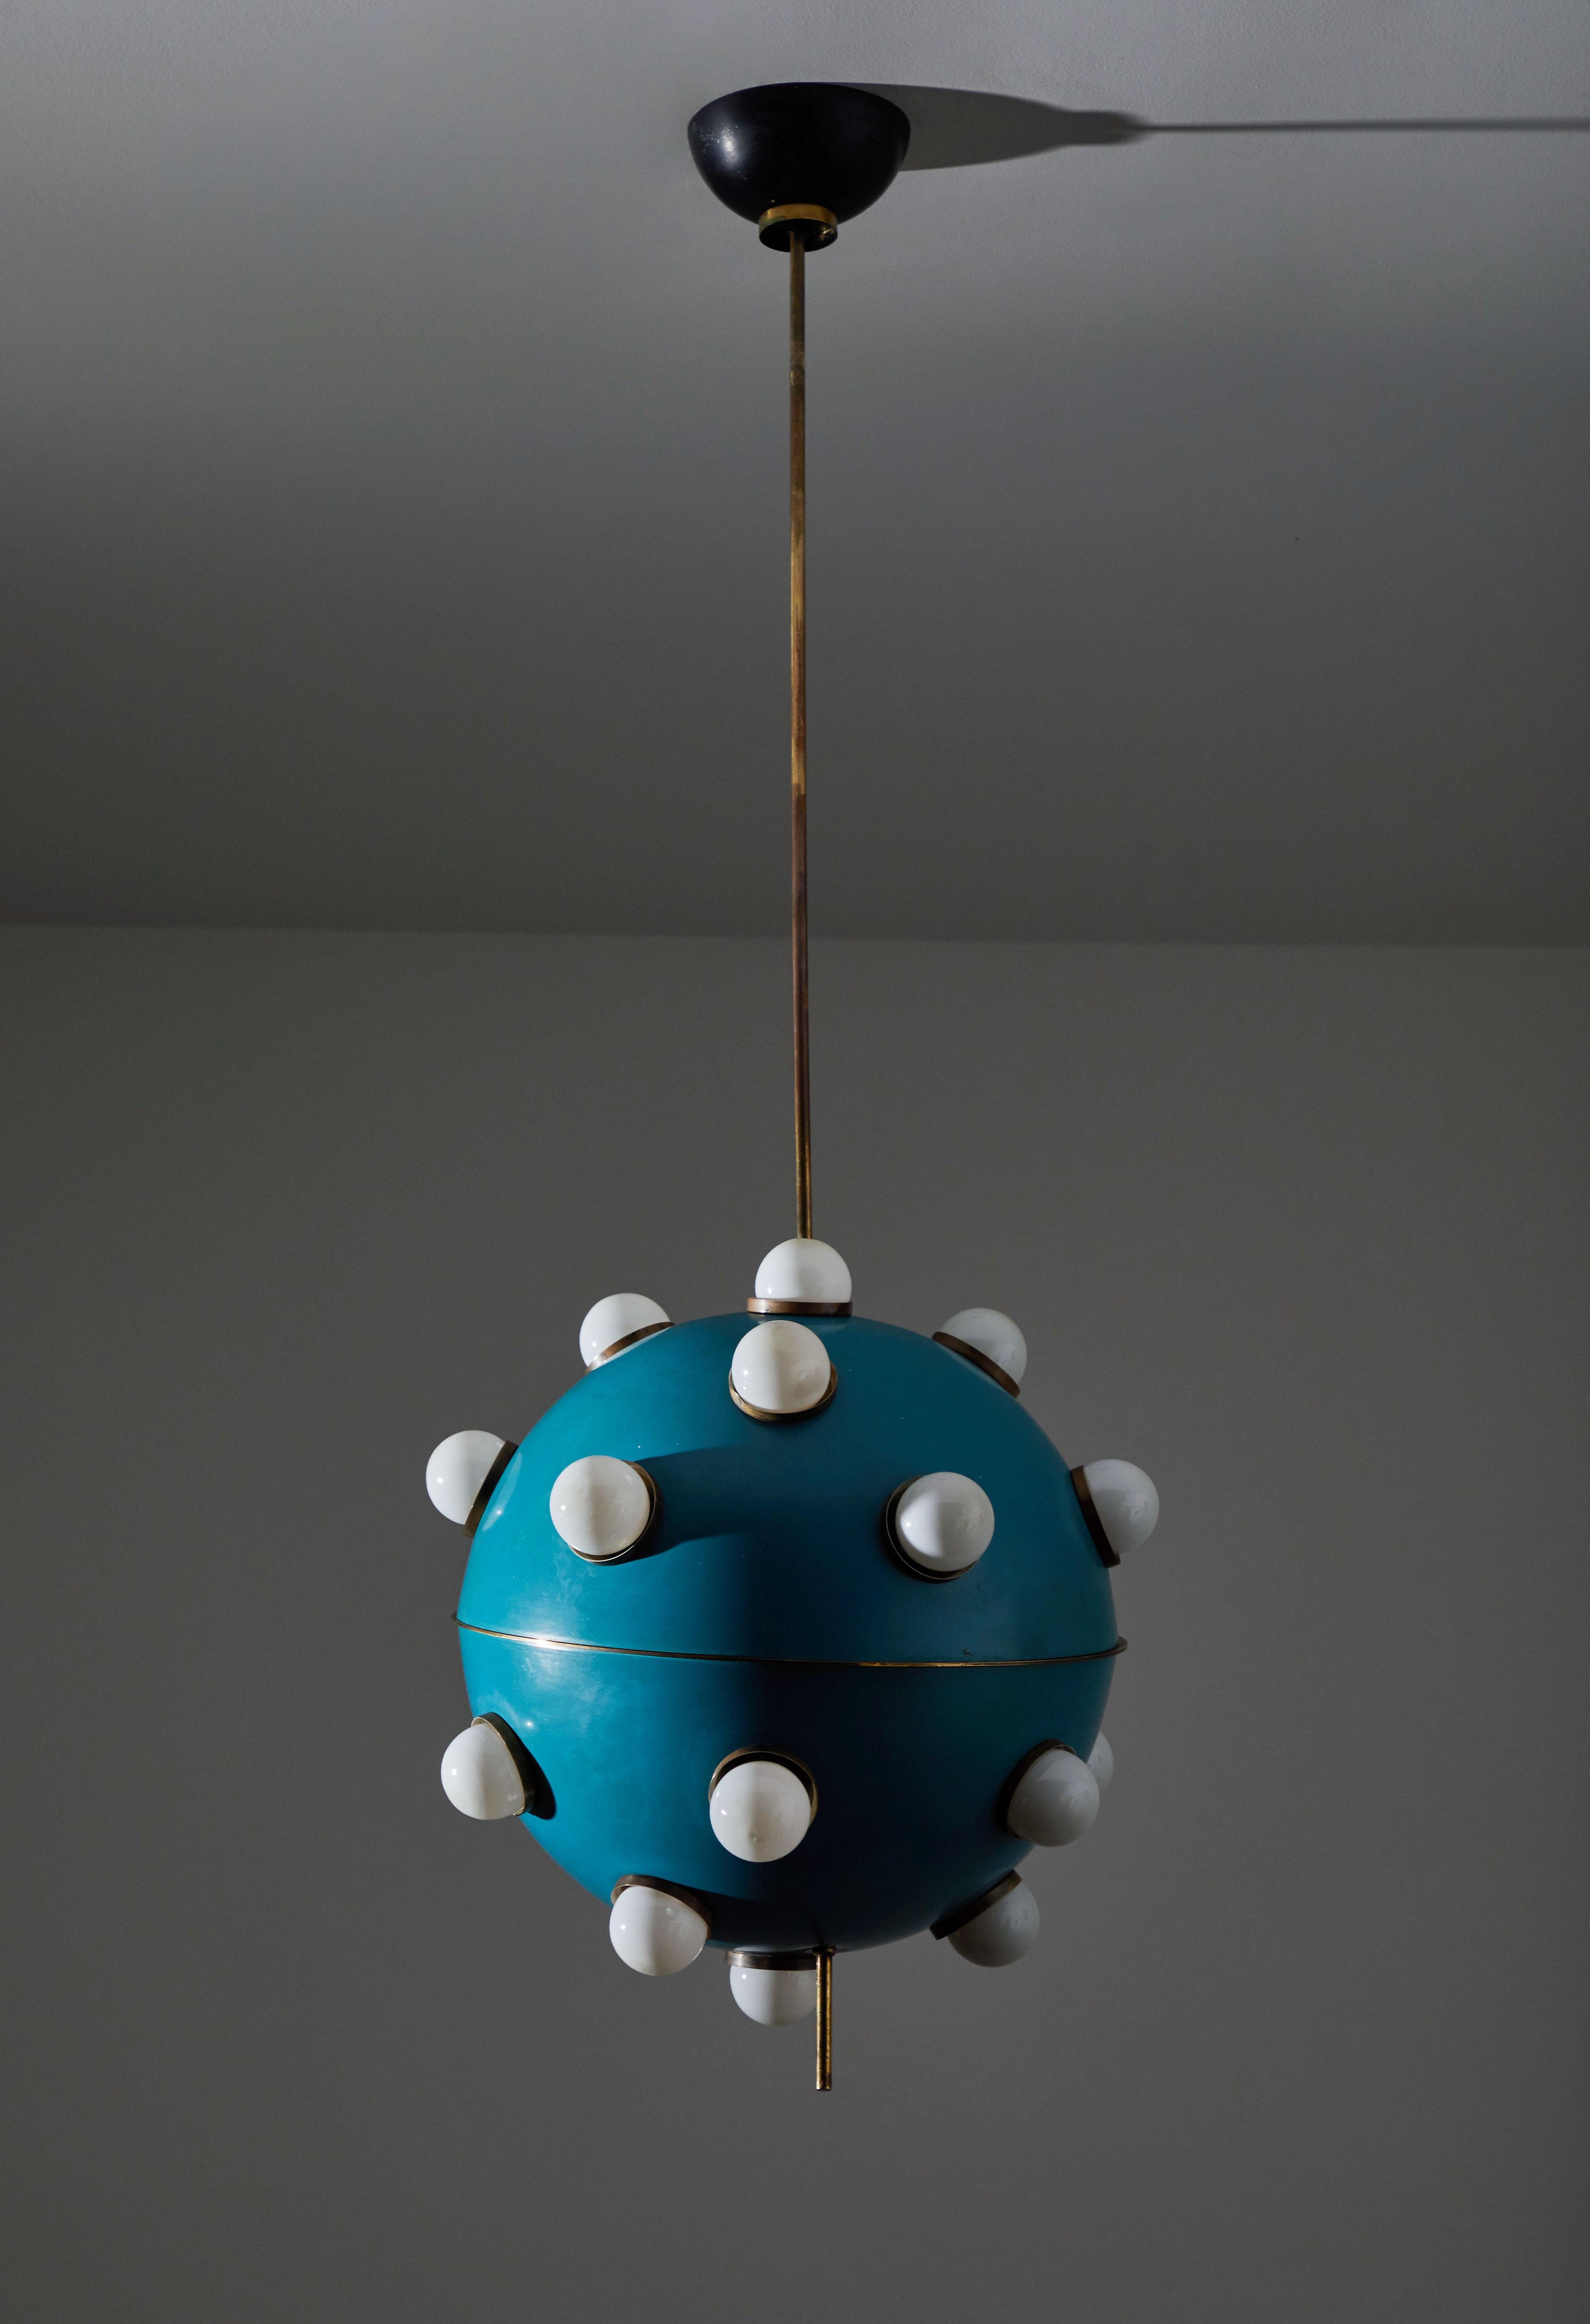 Large model 551 pendant by Oscar Torlasco for Lumi. Designed and manufactured in Italy, circa 1960s. Original enameled metal, brass hardware. Original canopy. Rewired for US junction boxes. Takes 20 E14 15w maximum bulbs.